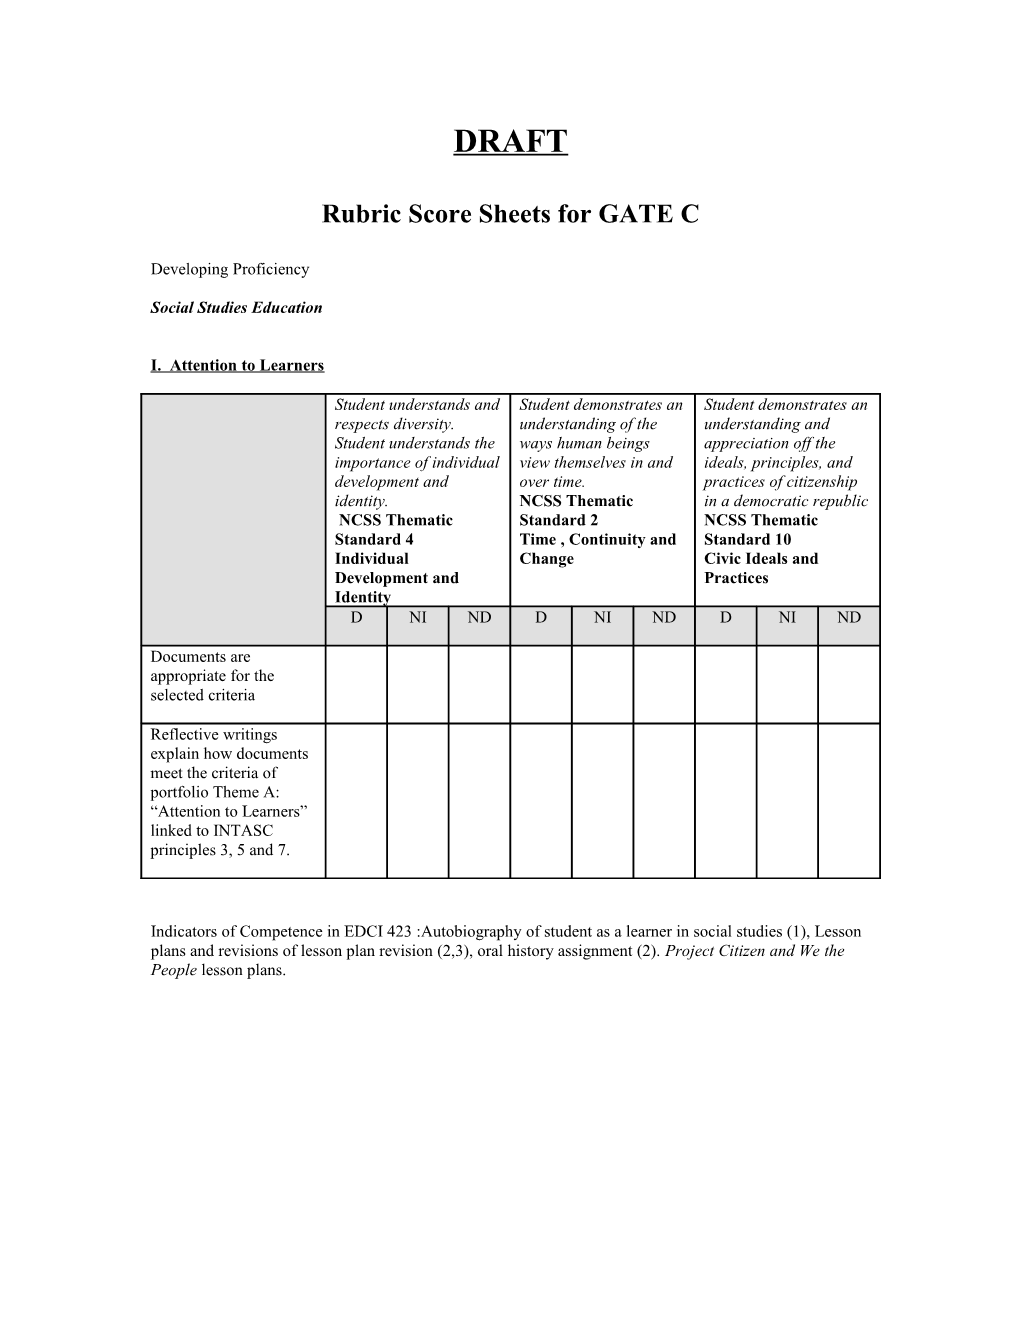 Rubric Score Sheets for GATE C